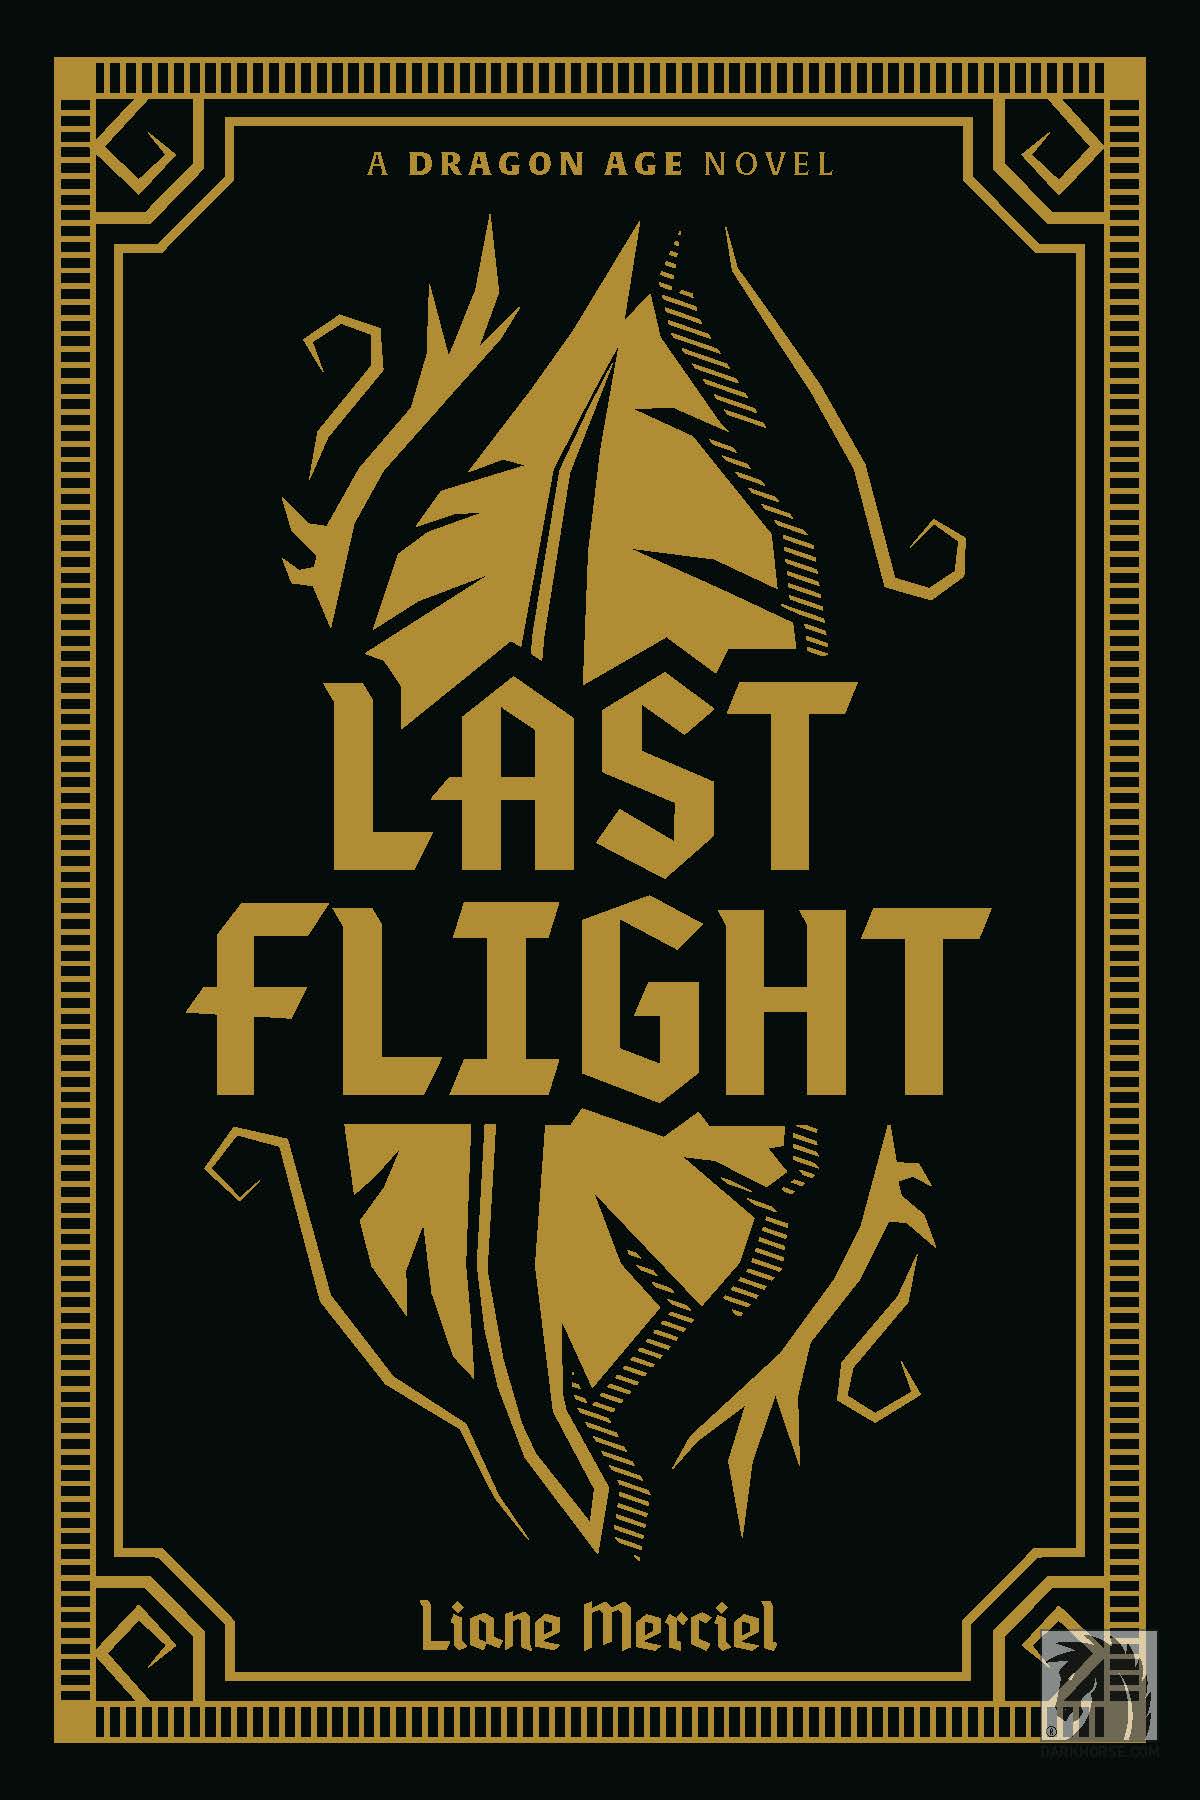 Dragon Age: Last Flight Deluxe Edition Review